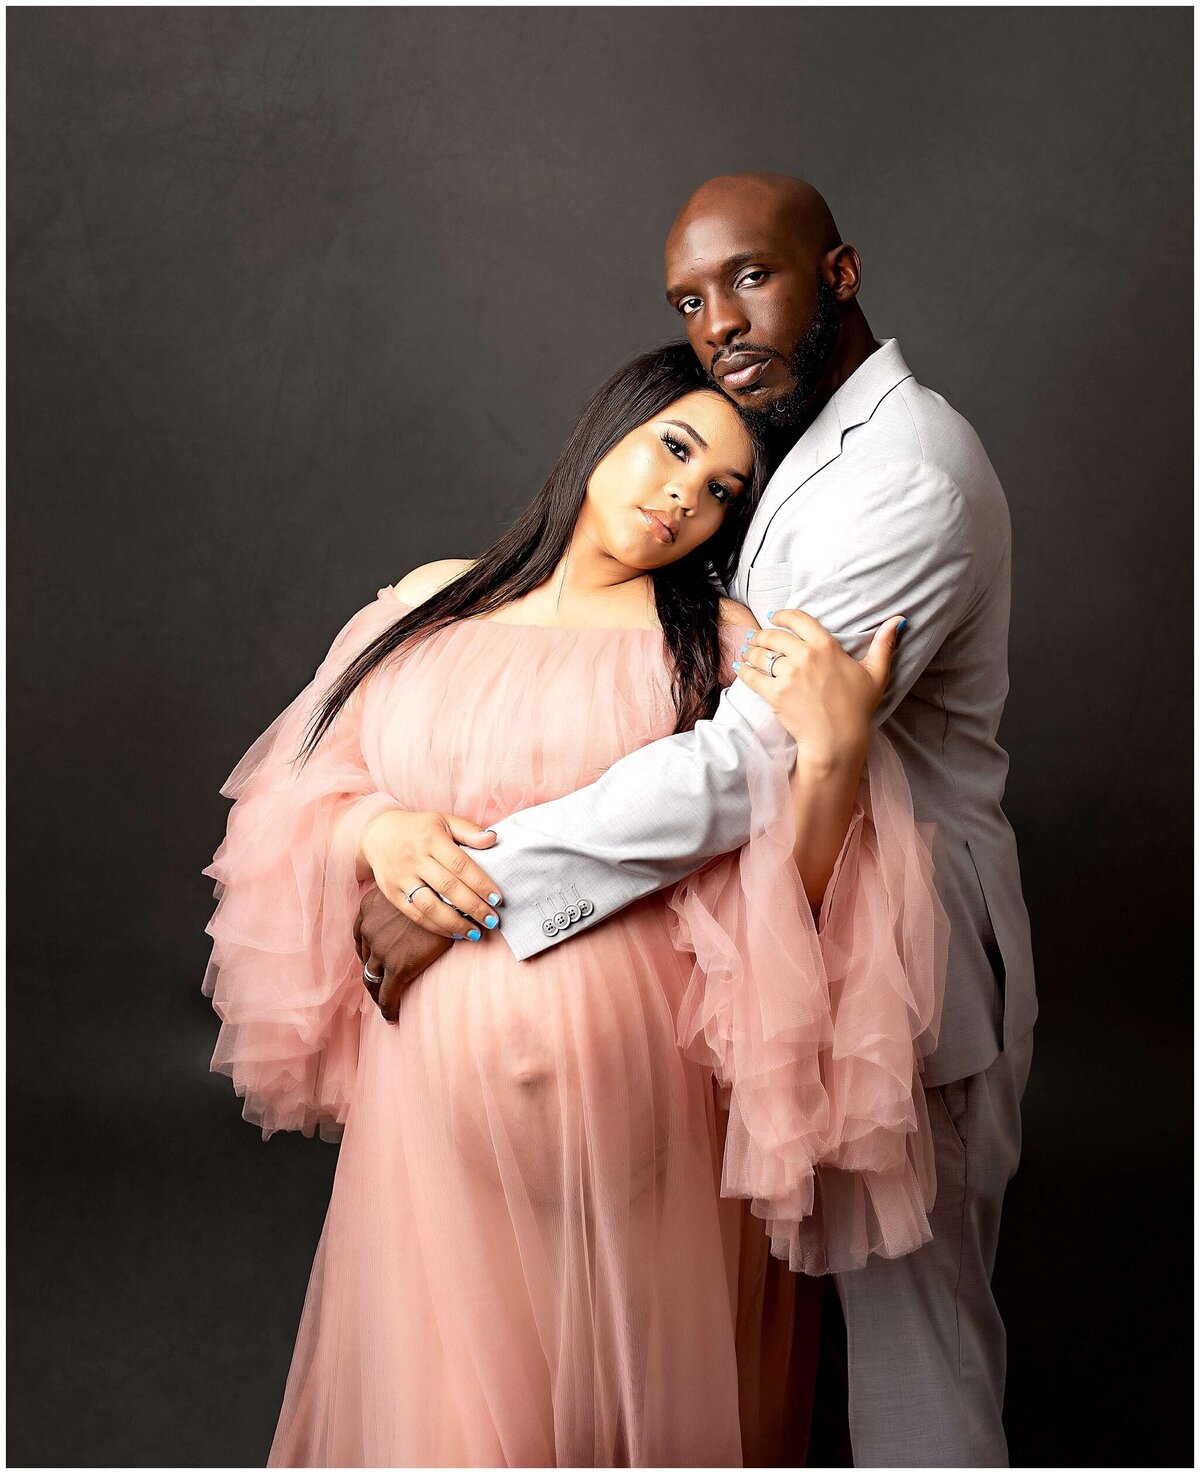 A couple in a maternity photoshoot, standing close together and cradling the pregnant belly. They both are looking at the camera and just relaxing into each others arms.